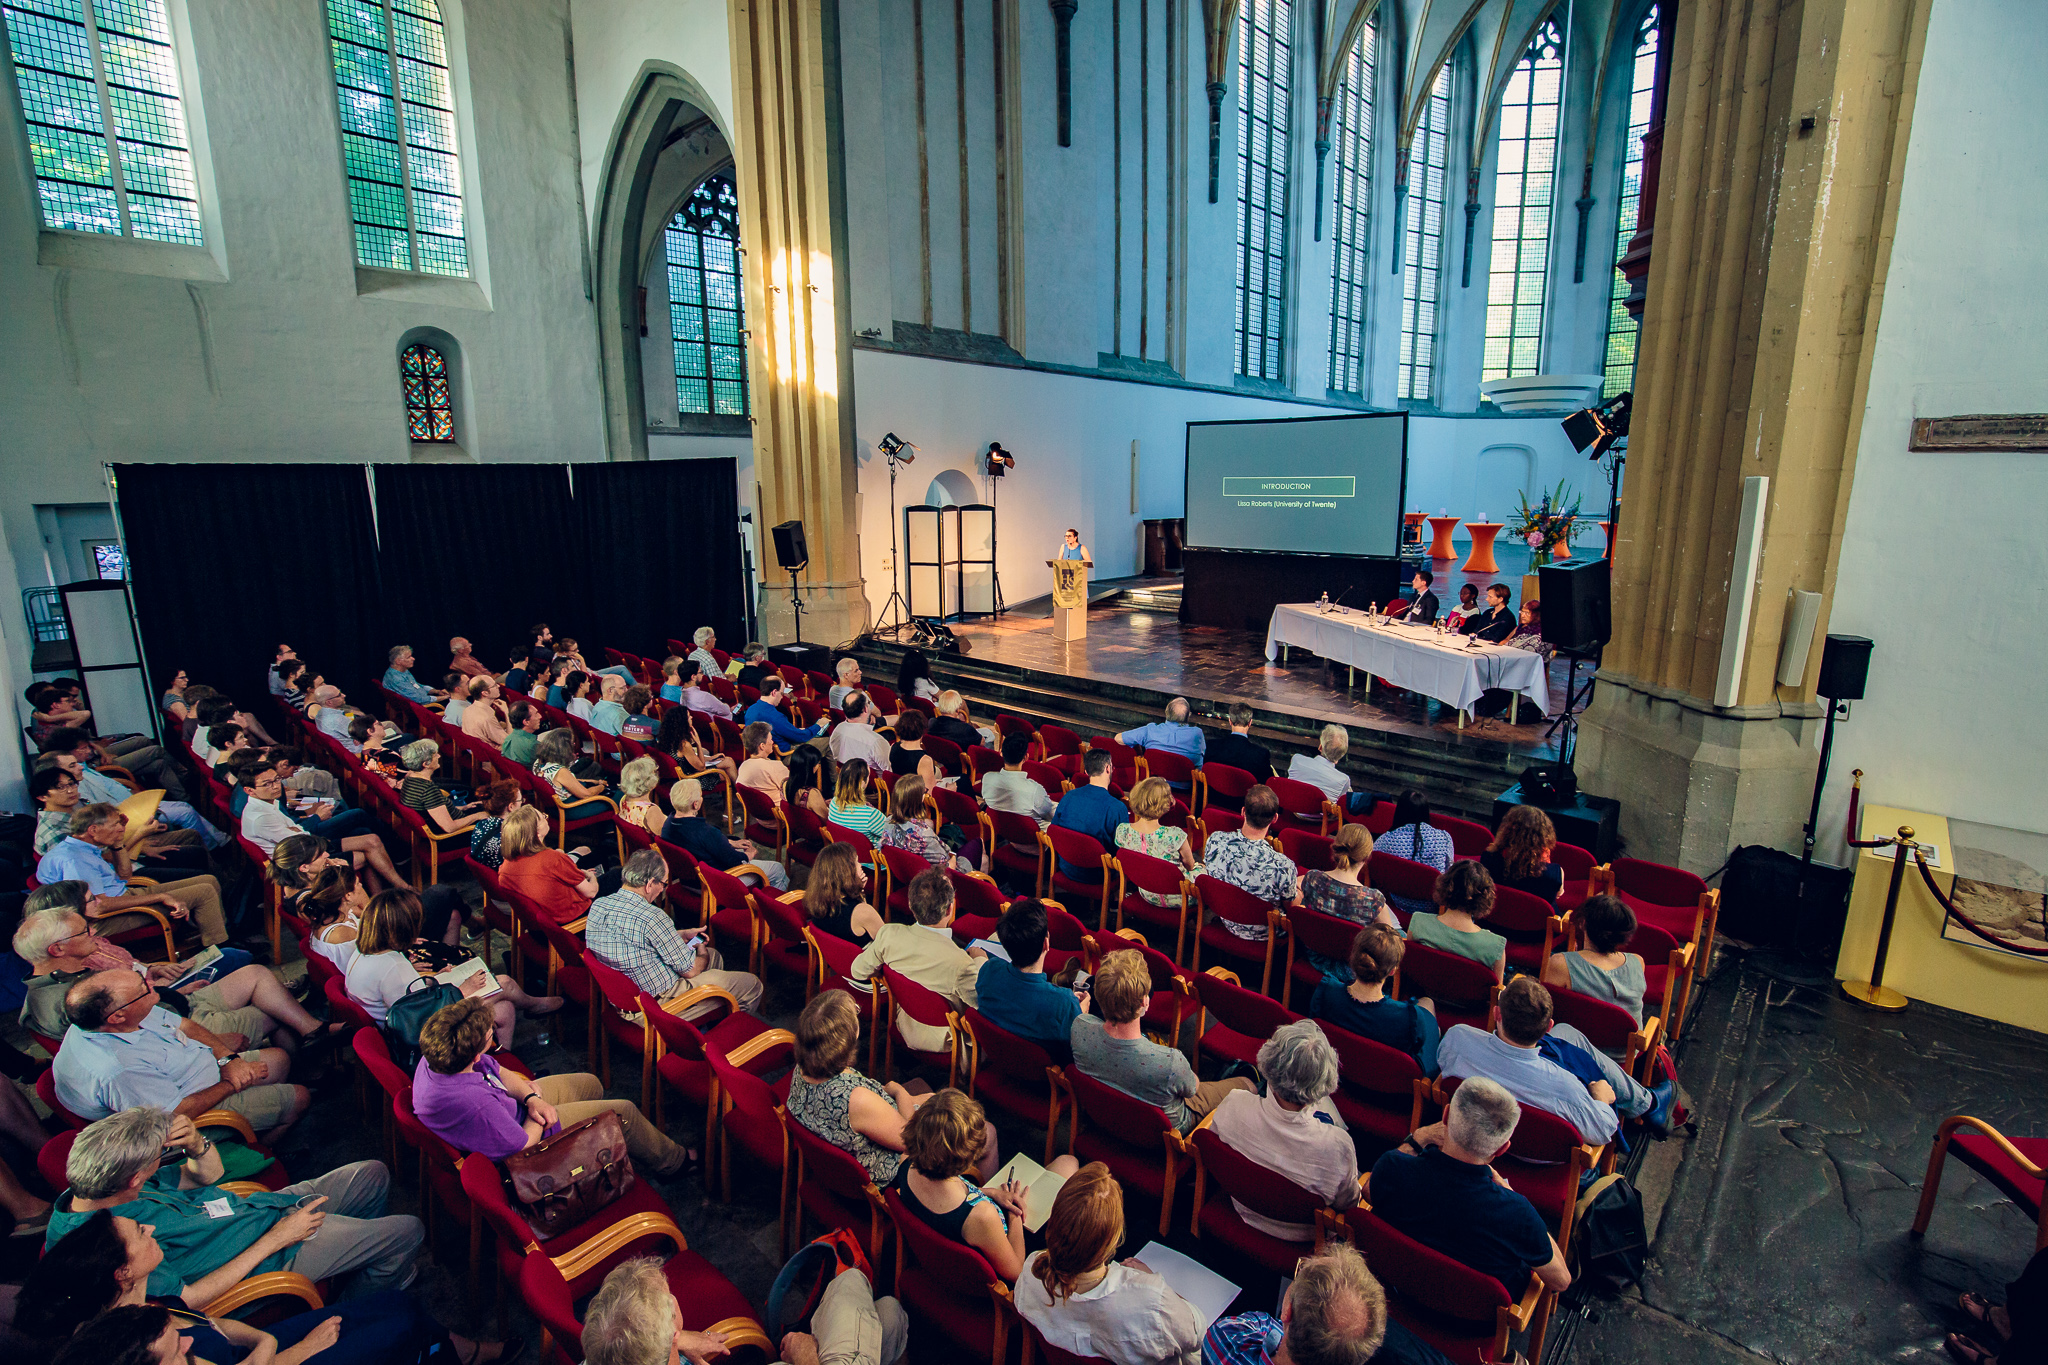 Conference meeting with dozens of people seated and looking at a presentation in a church-like setting